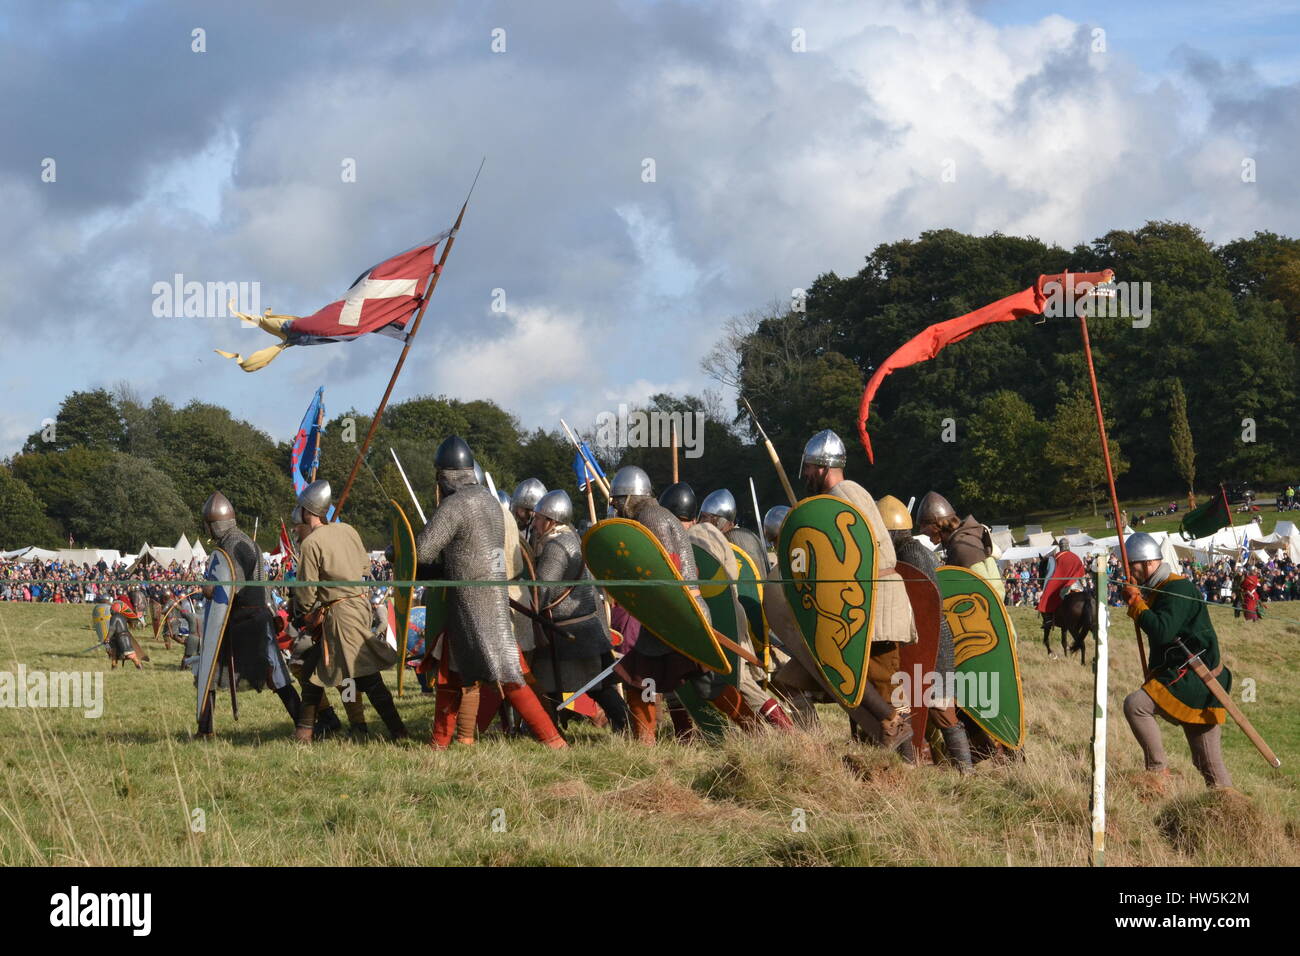 Battle of Hastings re-enactment event in the grounds of Battle Abbey Stock Photo